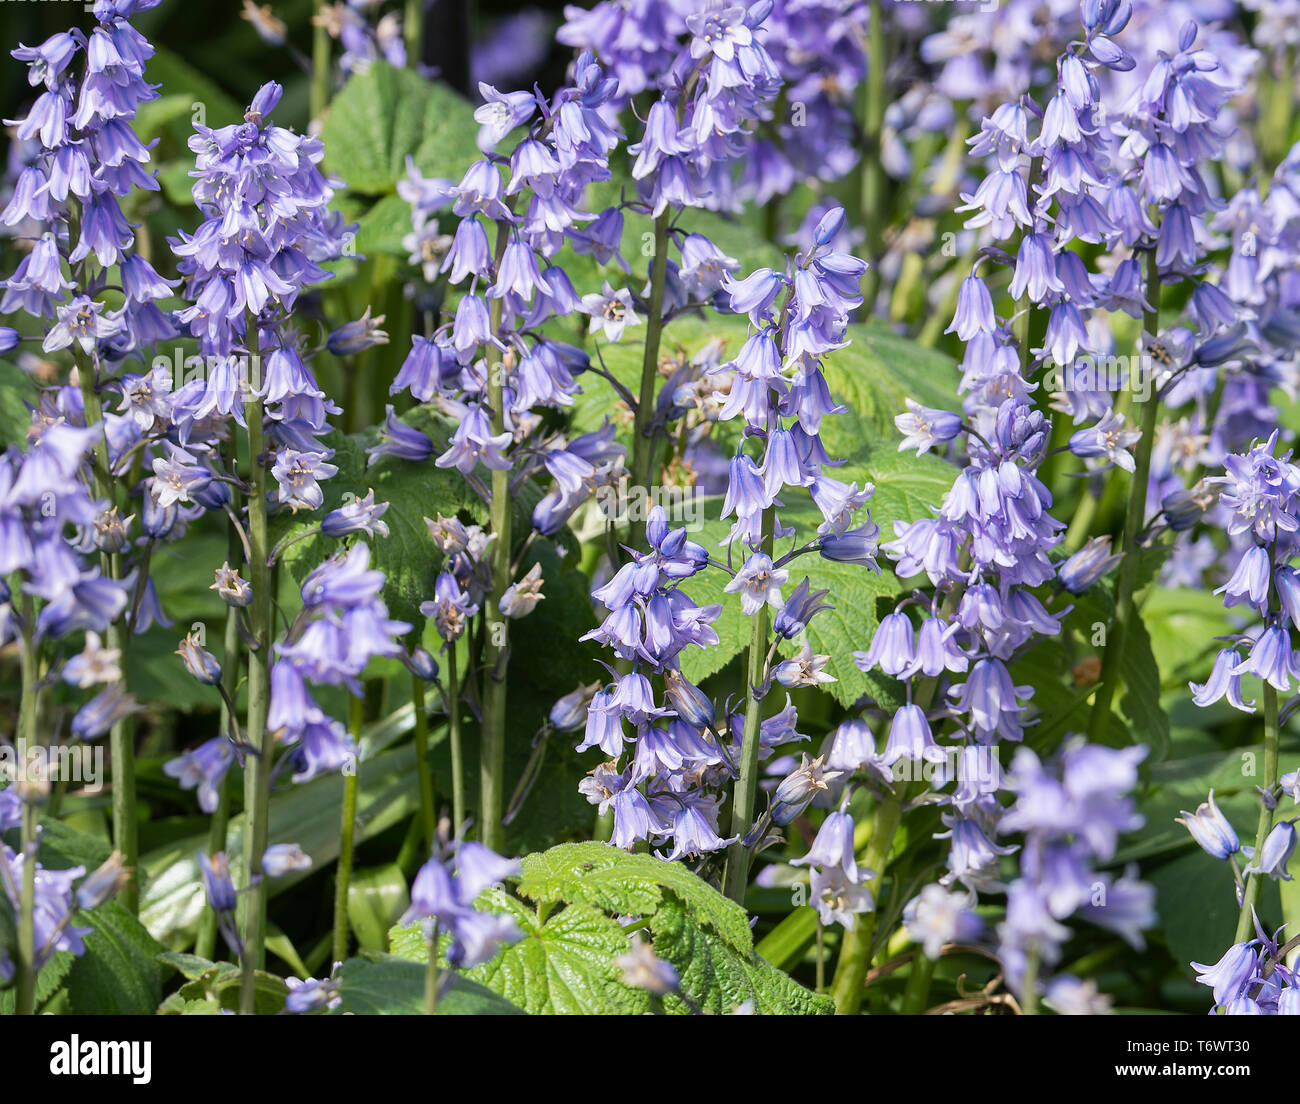 A Spanish Bluebell Flower in Full Bloom in a Garden in Alsager Cheshire England United Kingdom UK Stock Photo